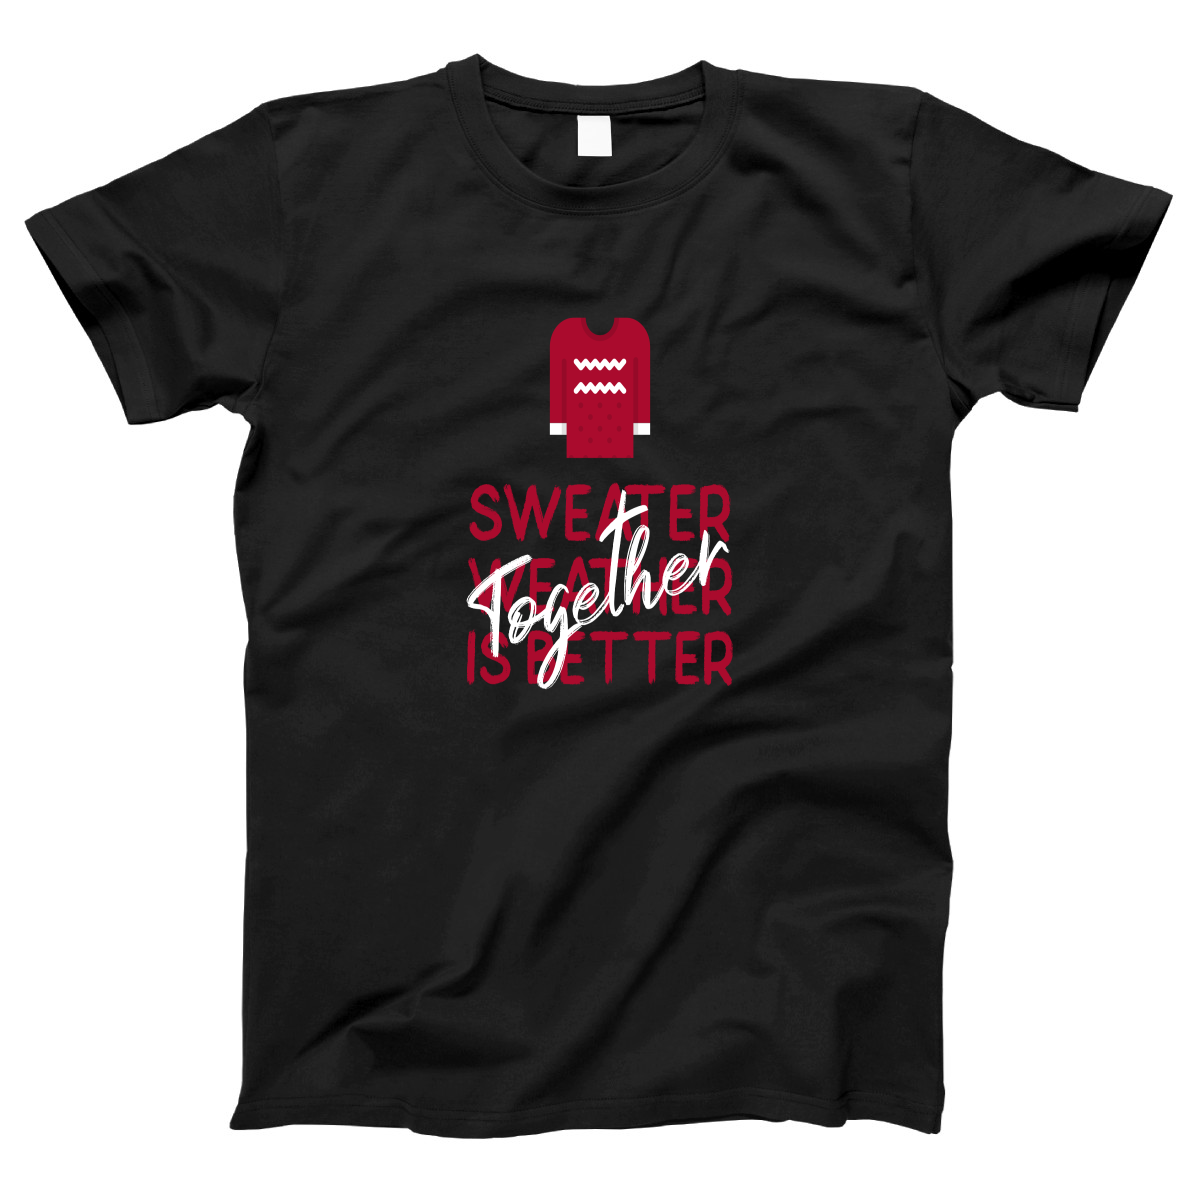 Sweather Weather is Better Together Women's T-shirt | Black